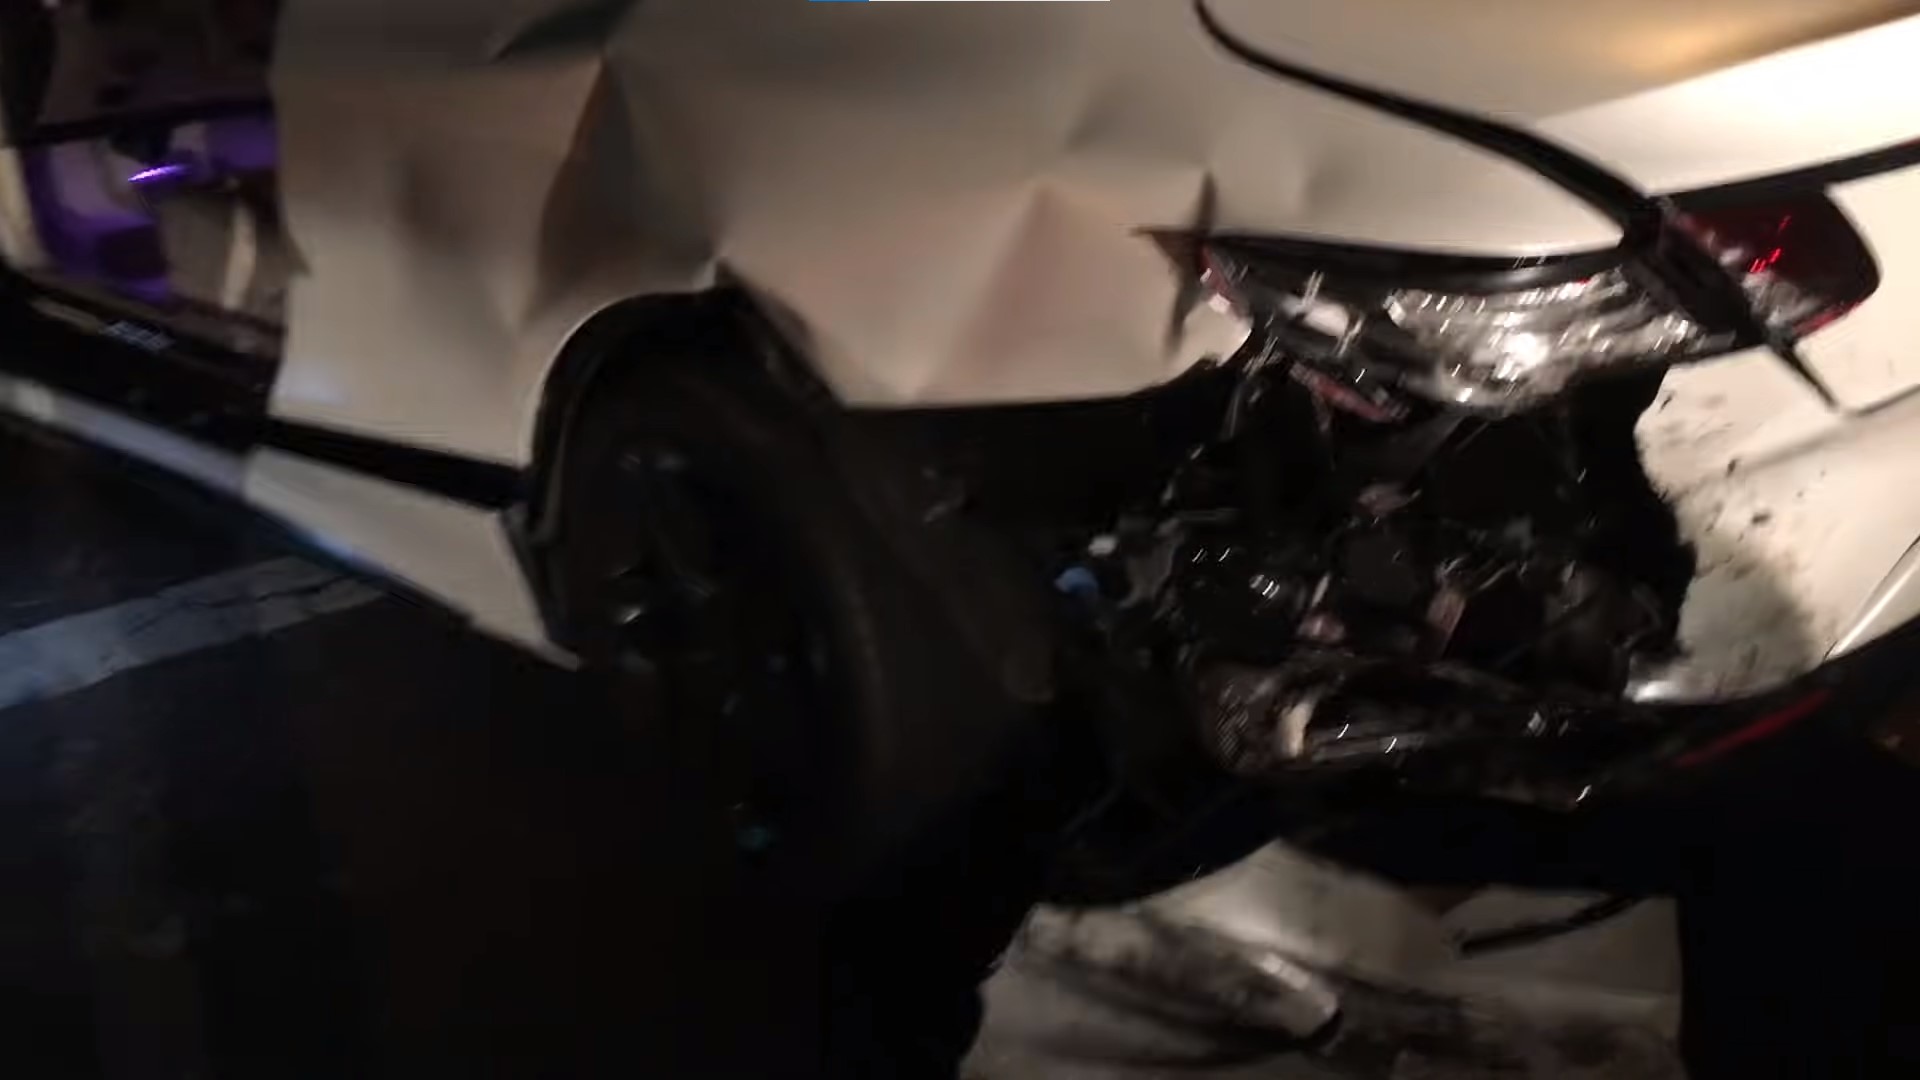 SSSniperWolf's car was wrecked after it got hit by a drunk driver